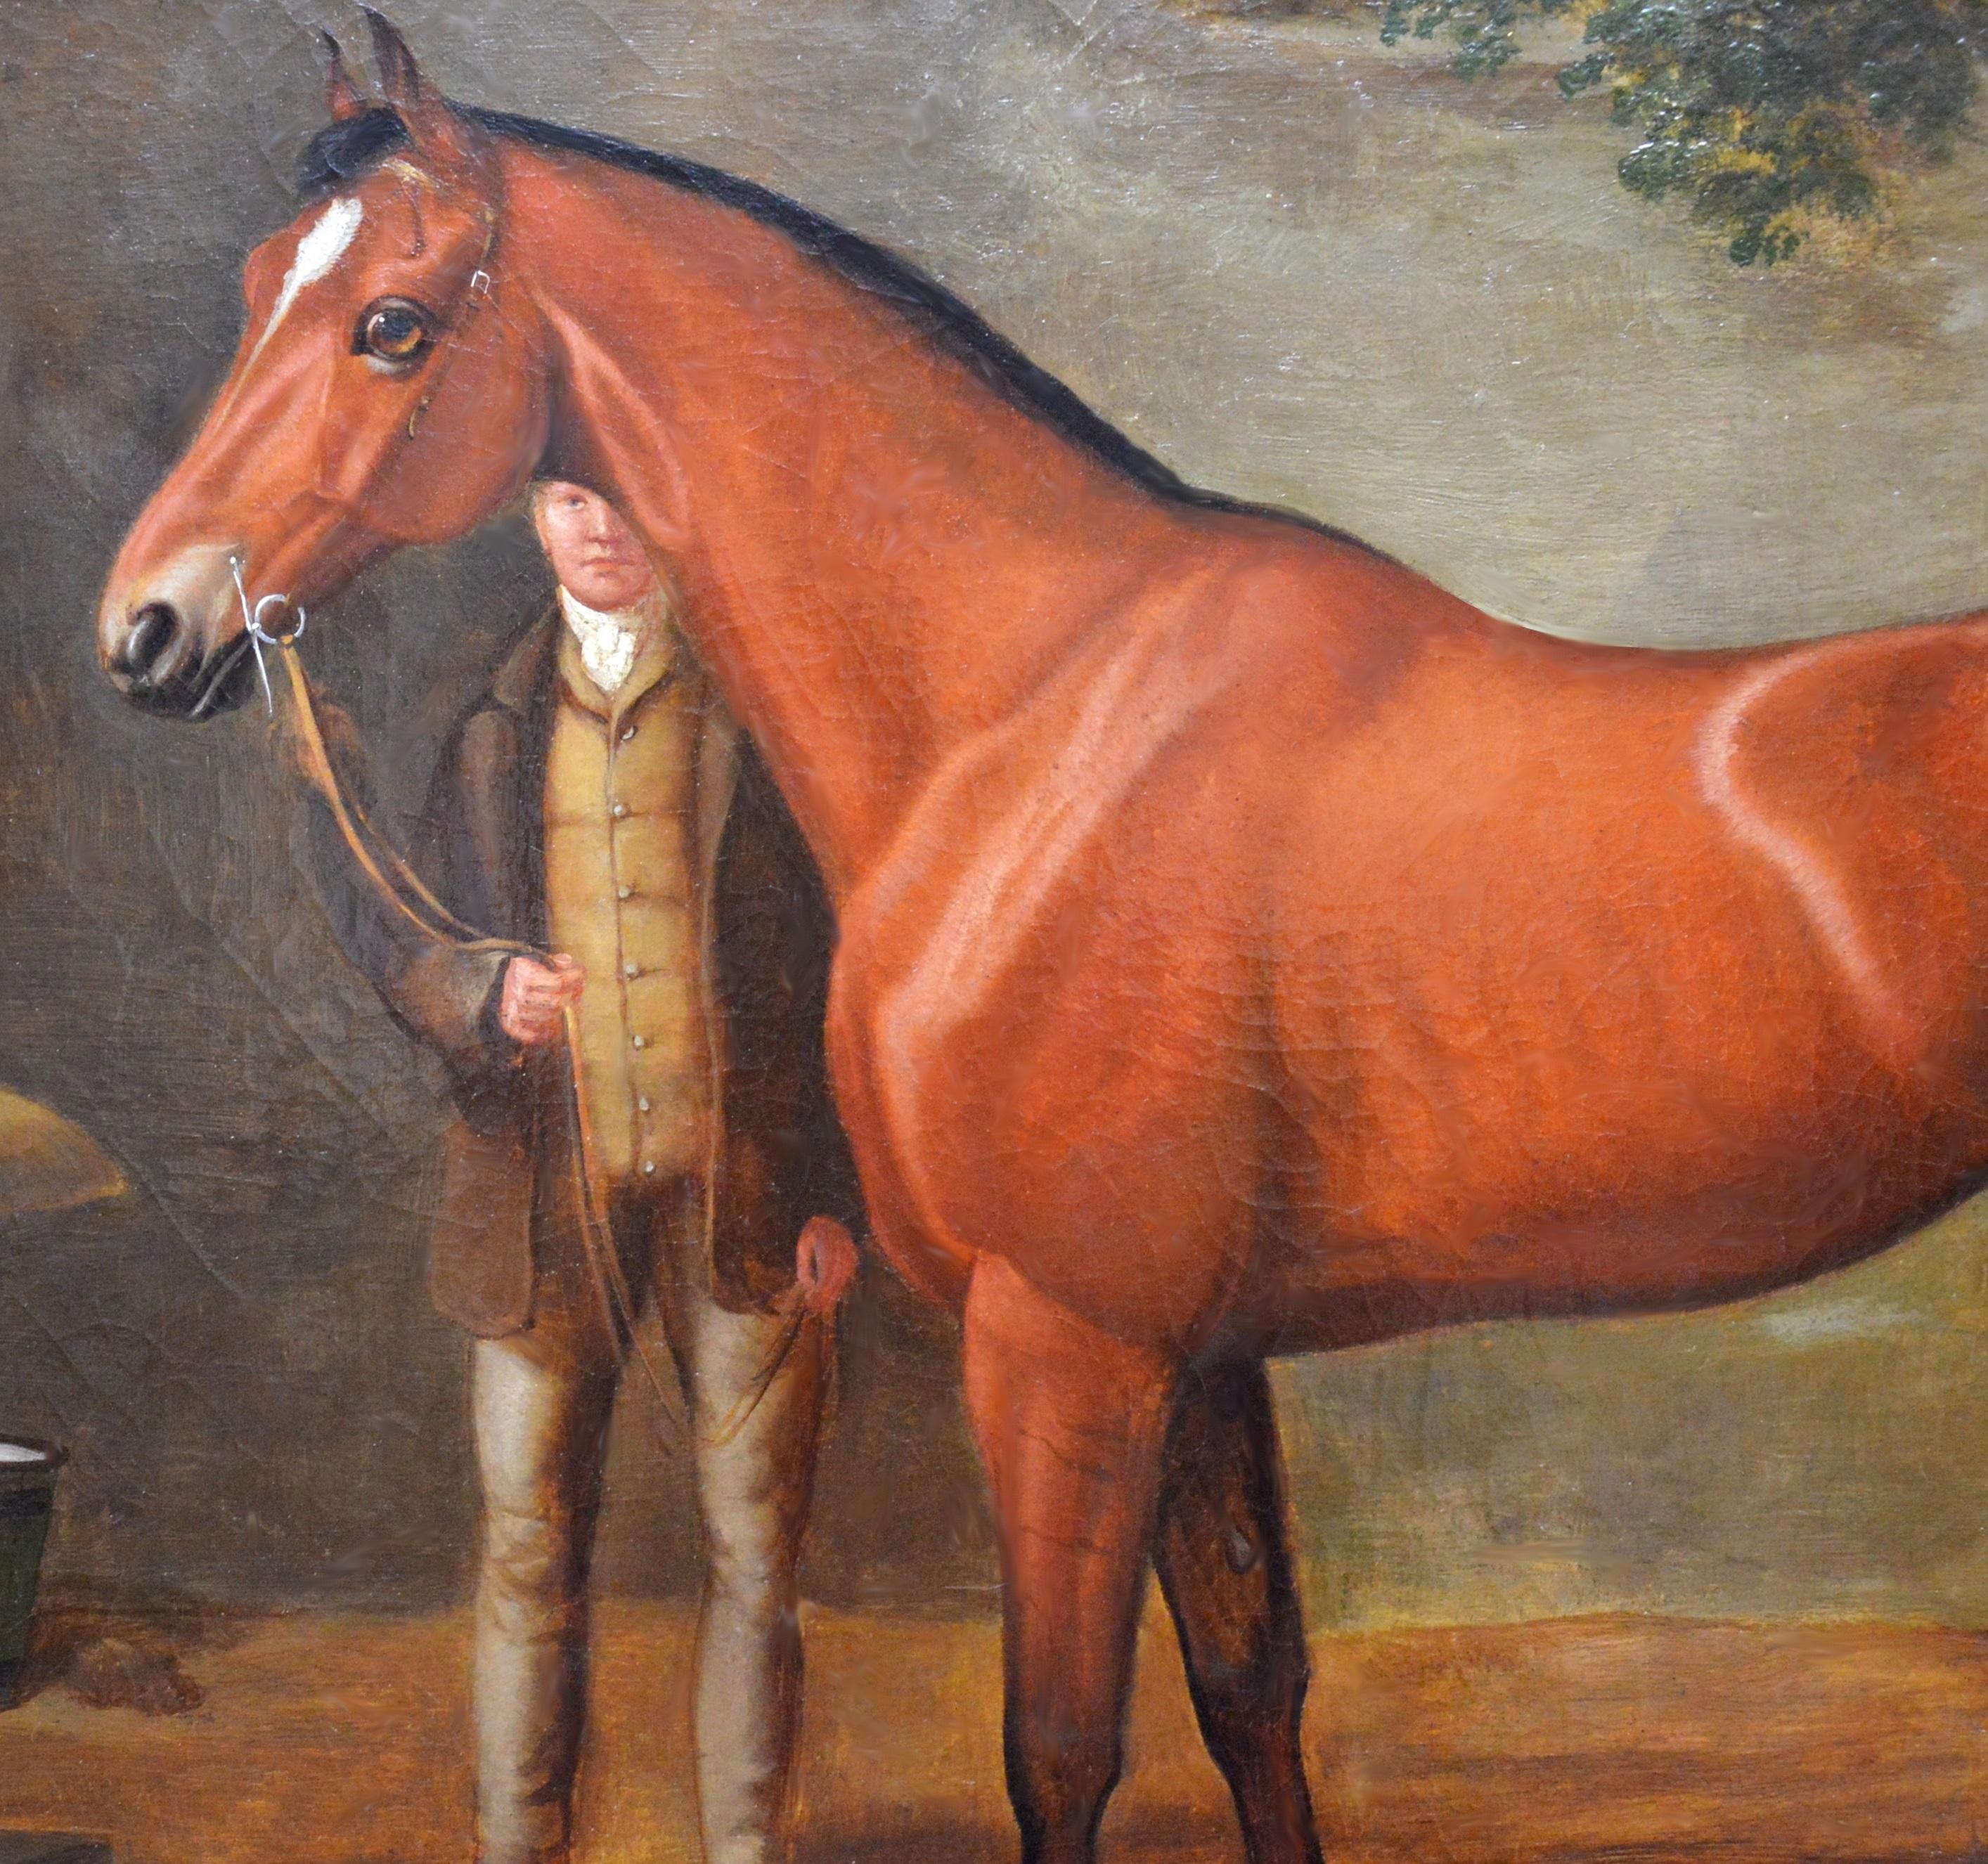 The Collier - Mid 19th Century Equine Oil Painting Portrait English Thoroughbred - Brown Portrait Painting by John Paul